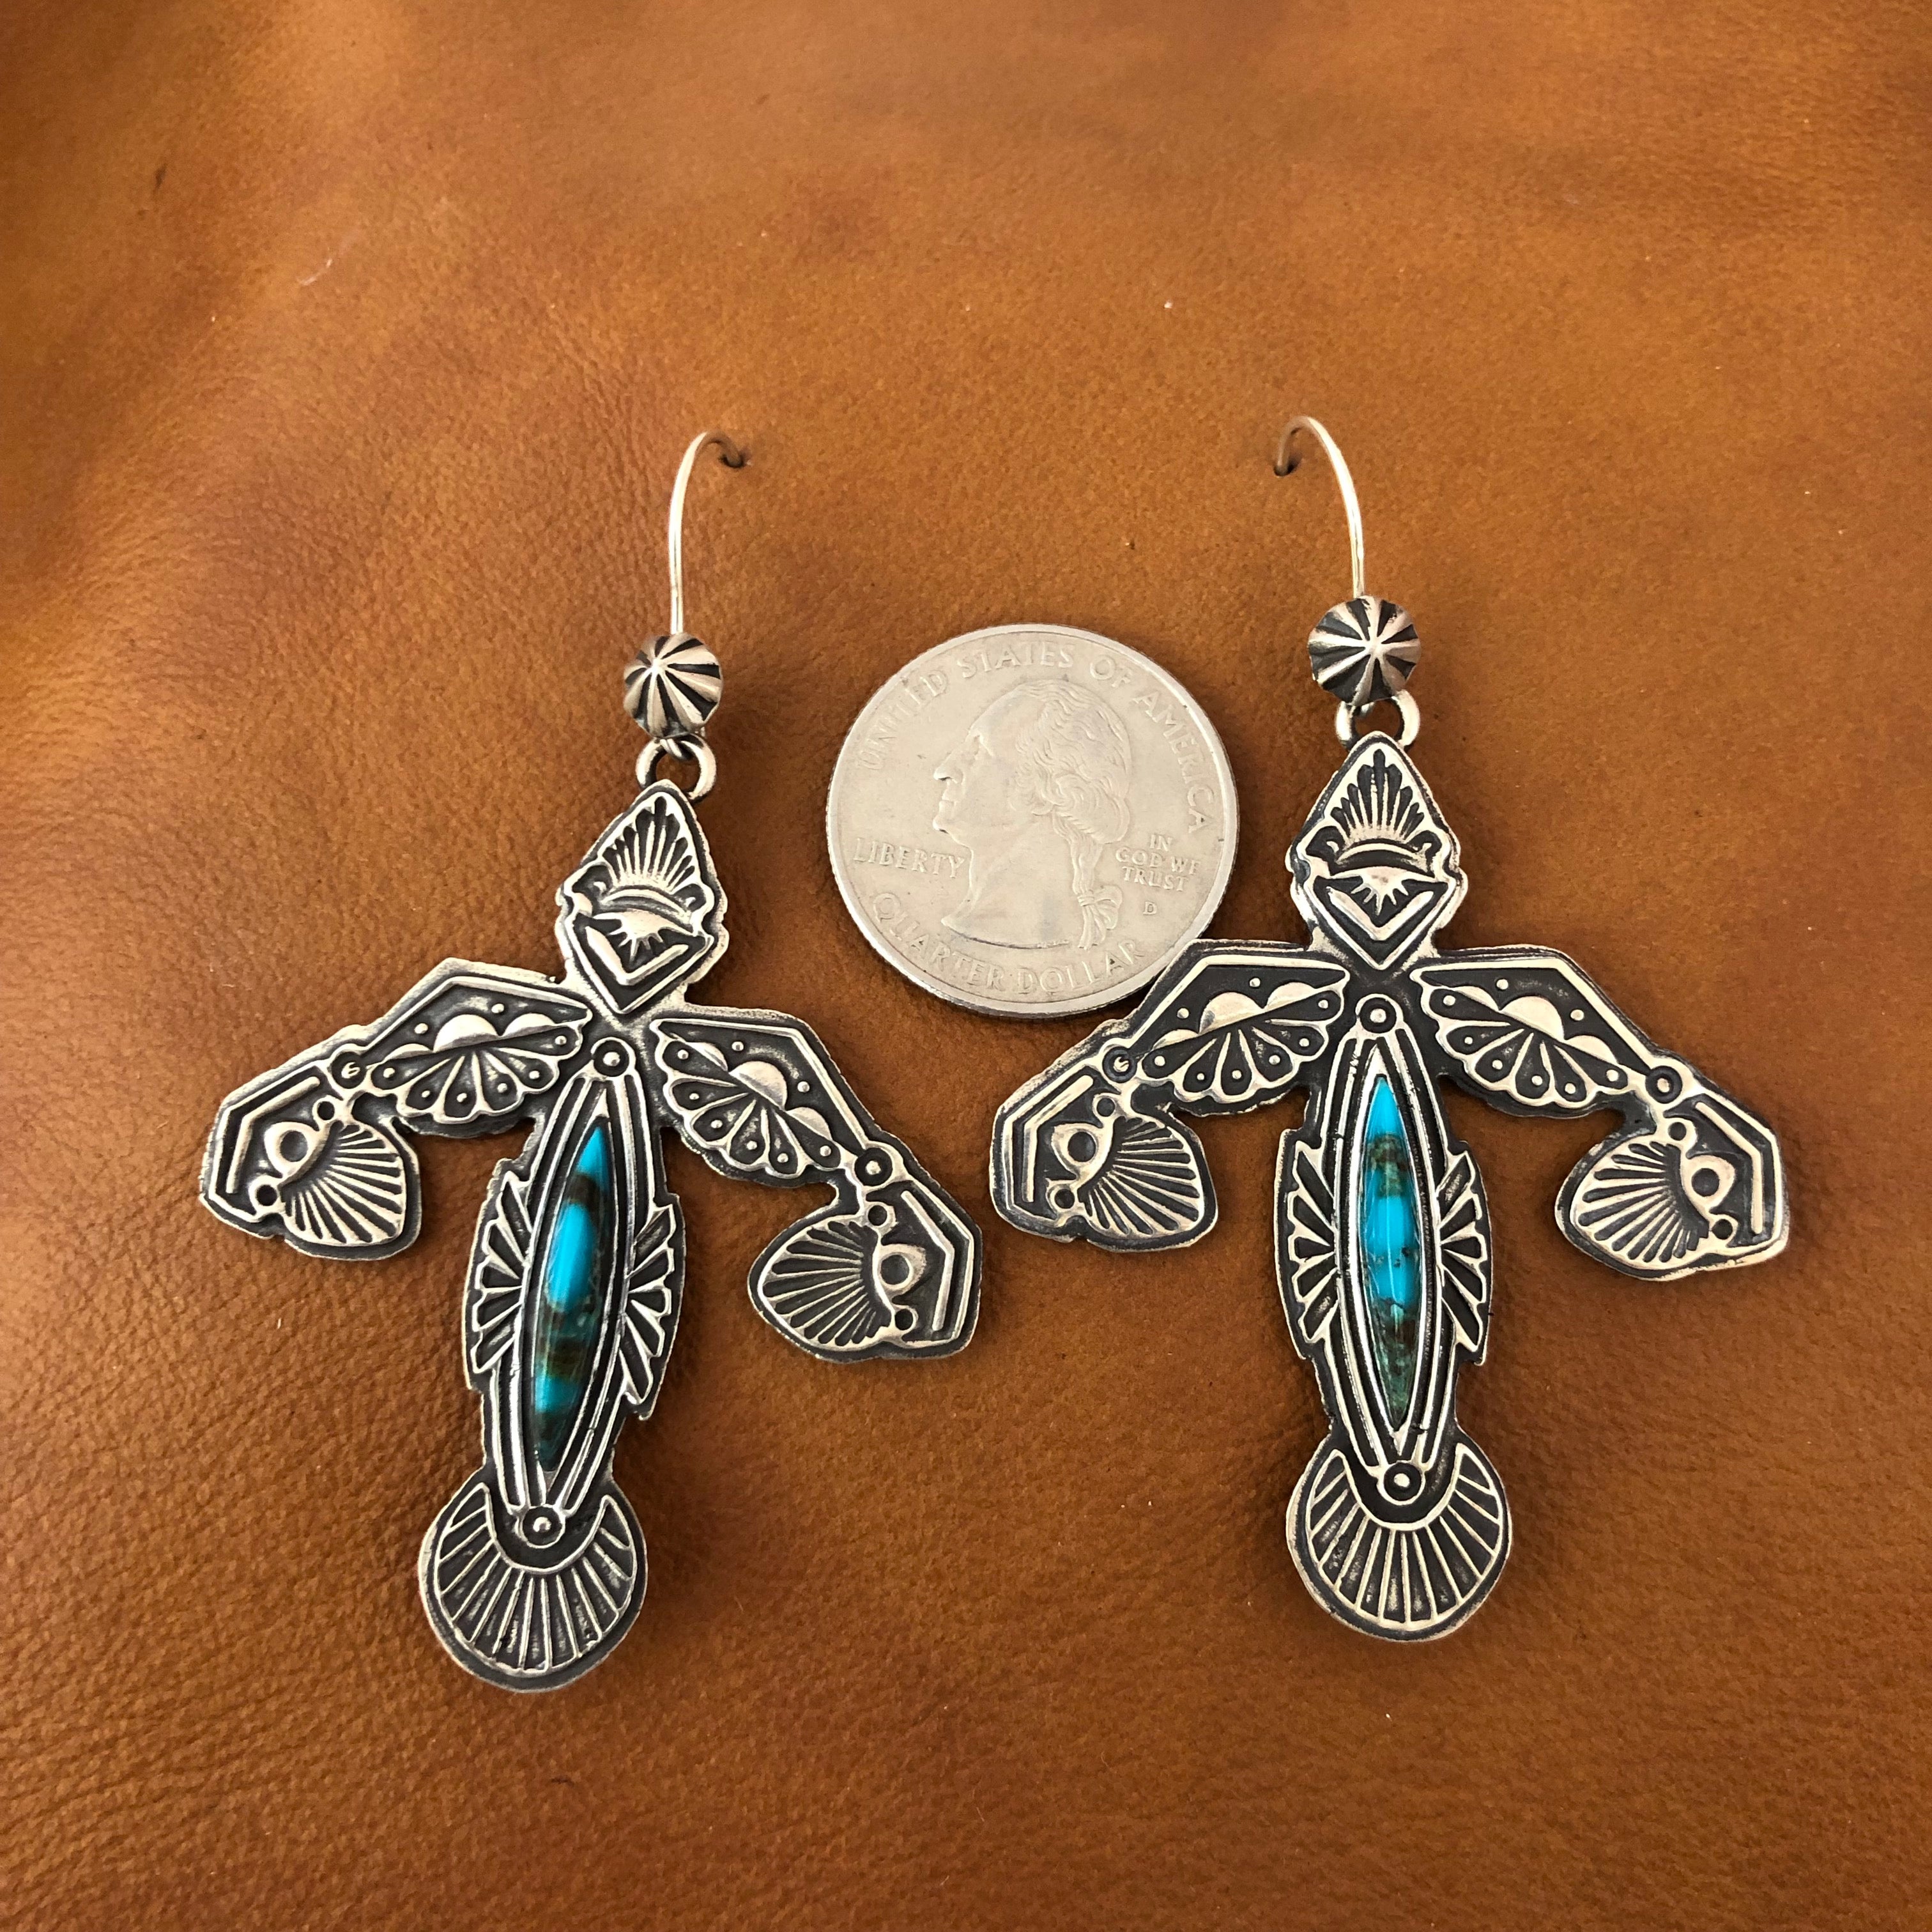 ERV3 Raven Soaring with Turquoise Earrings